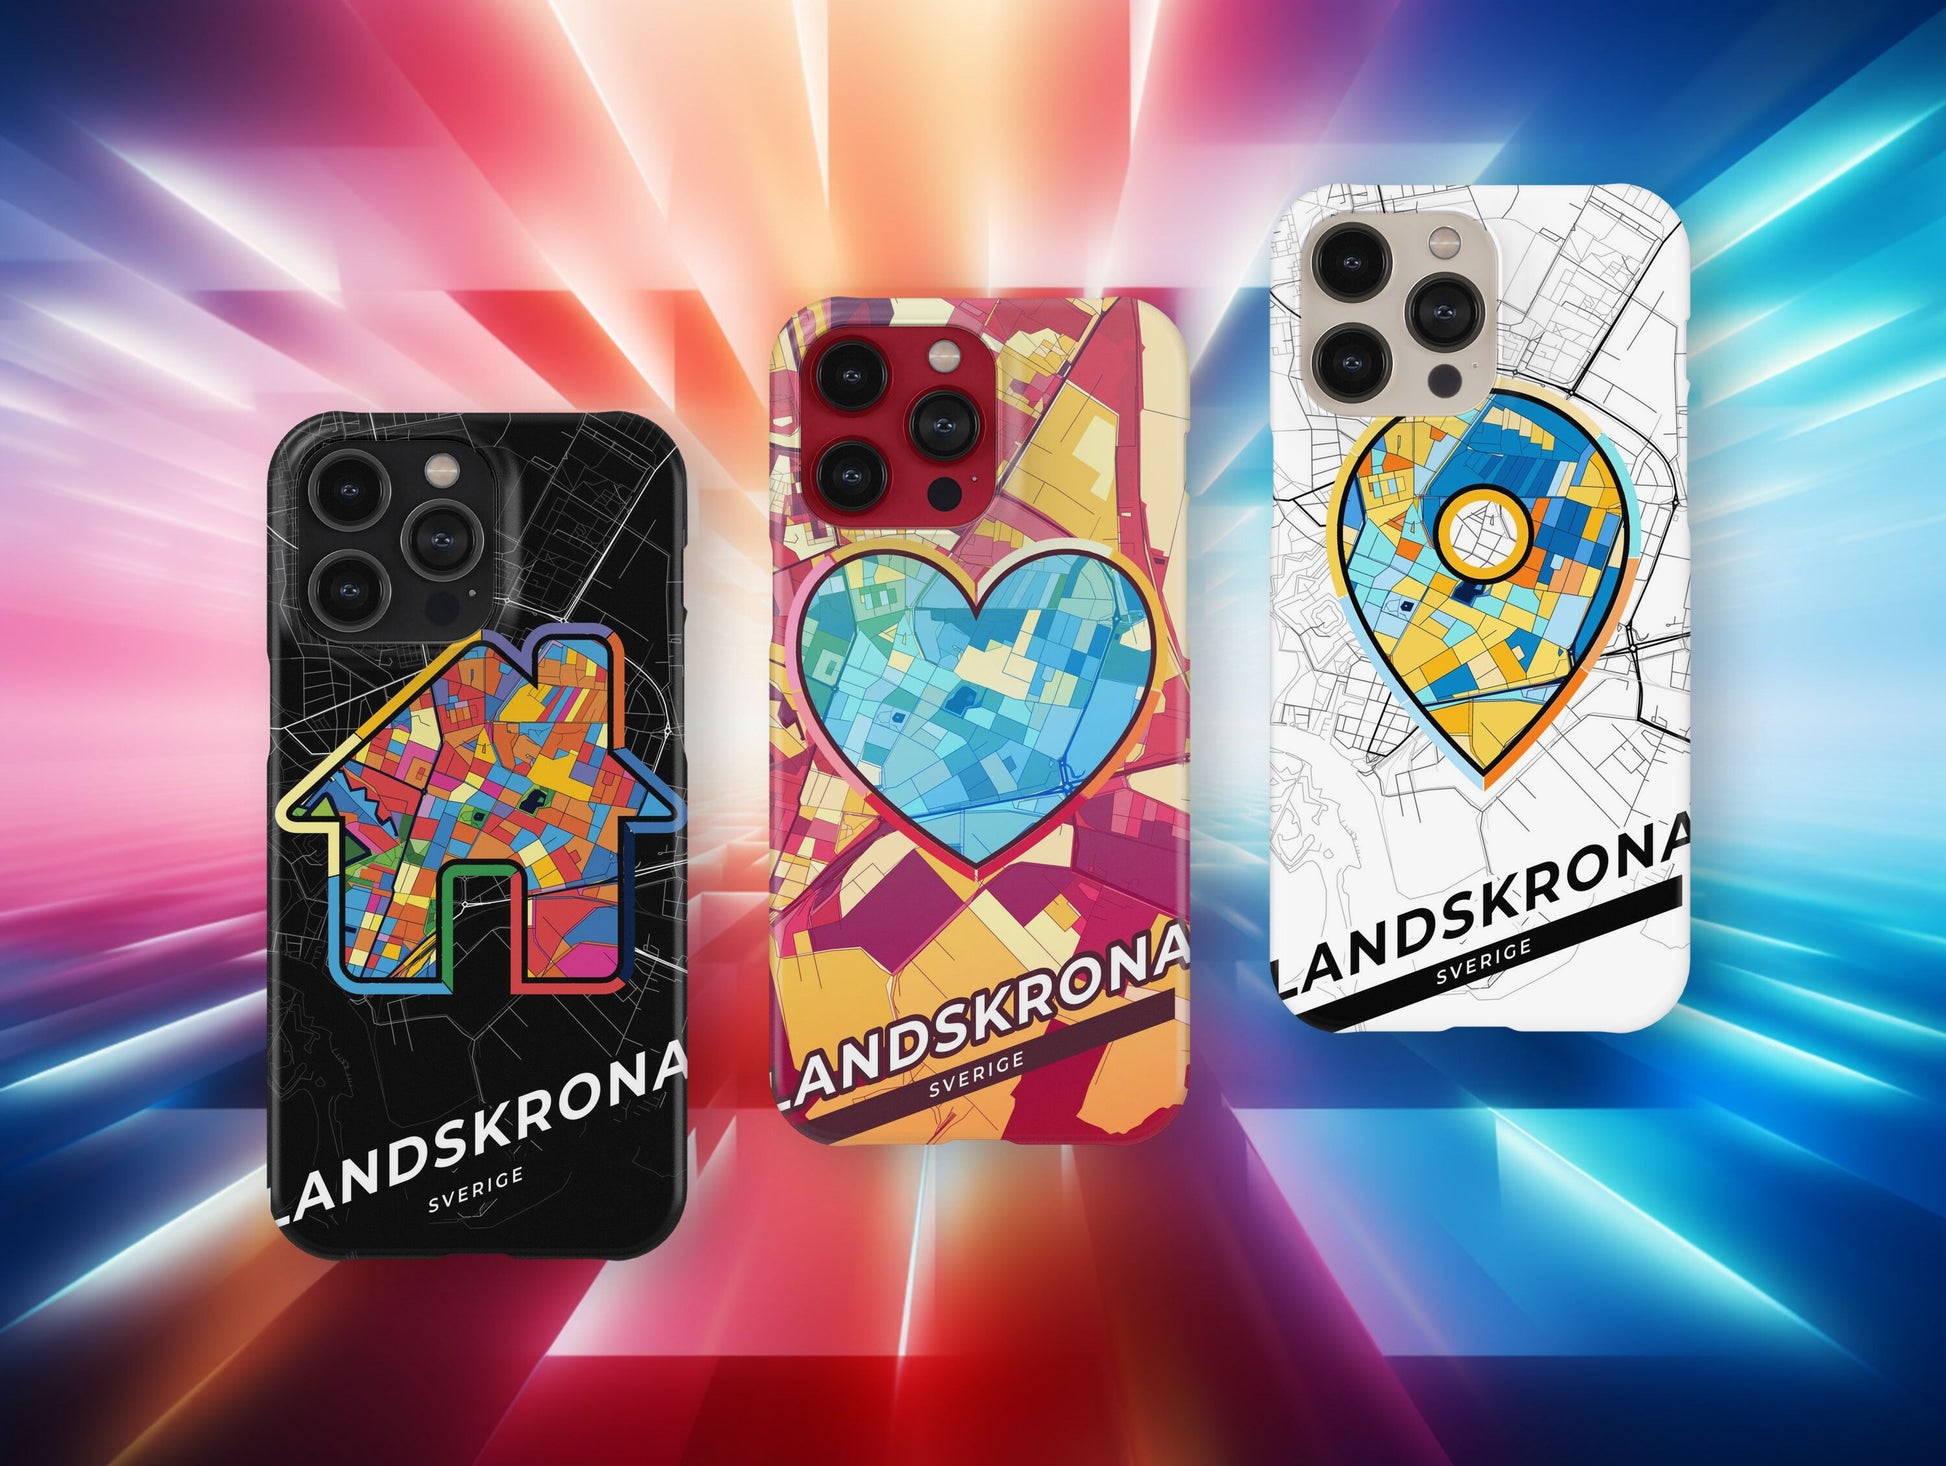 Landskrona Sweden slim phone case with colorful icon. Birthday, wedding or housewarming gift. Couple match cases.